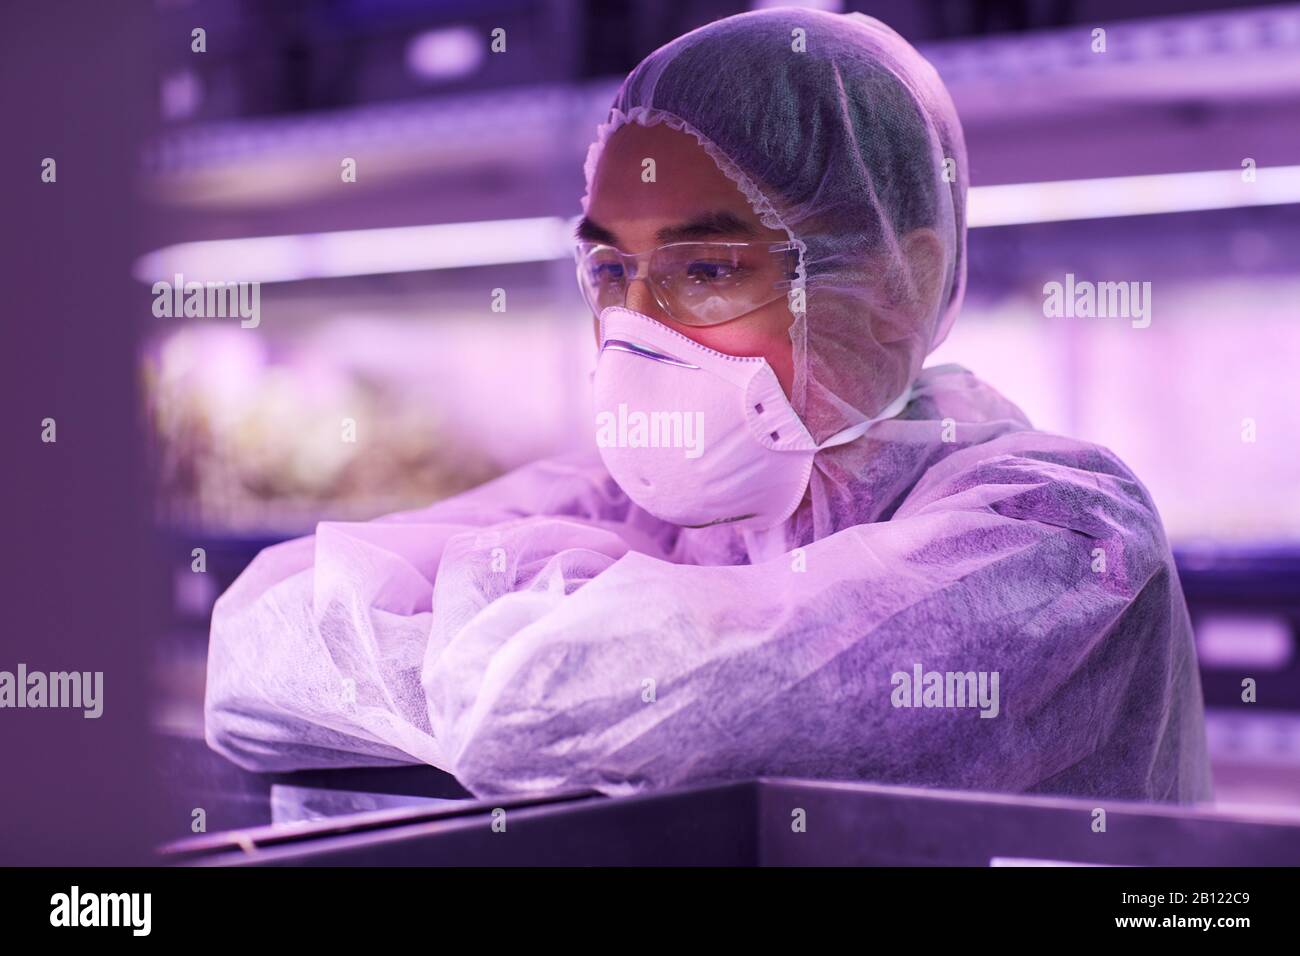 Asian scientist in protective clothing and protective mask working with chemicals Stock Photo